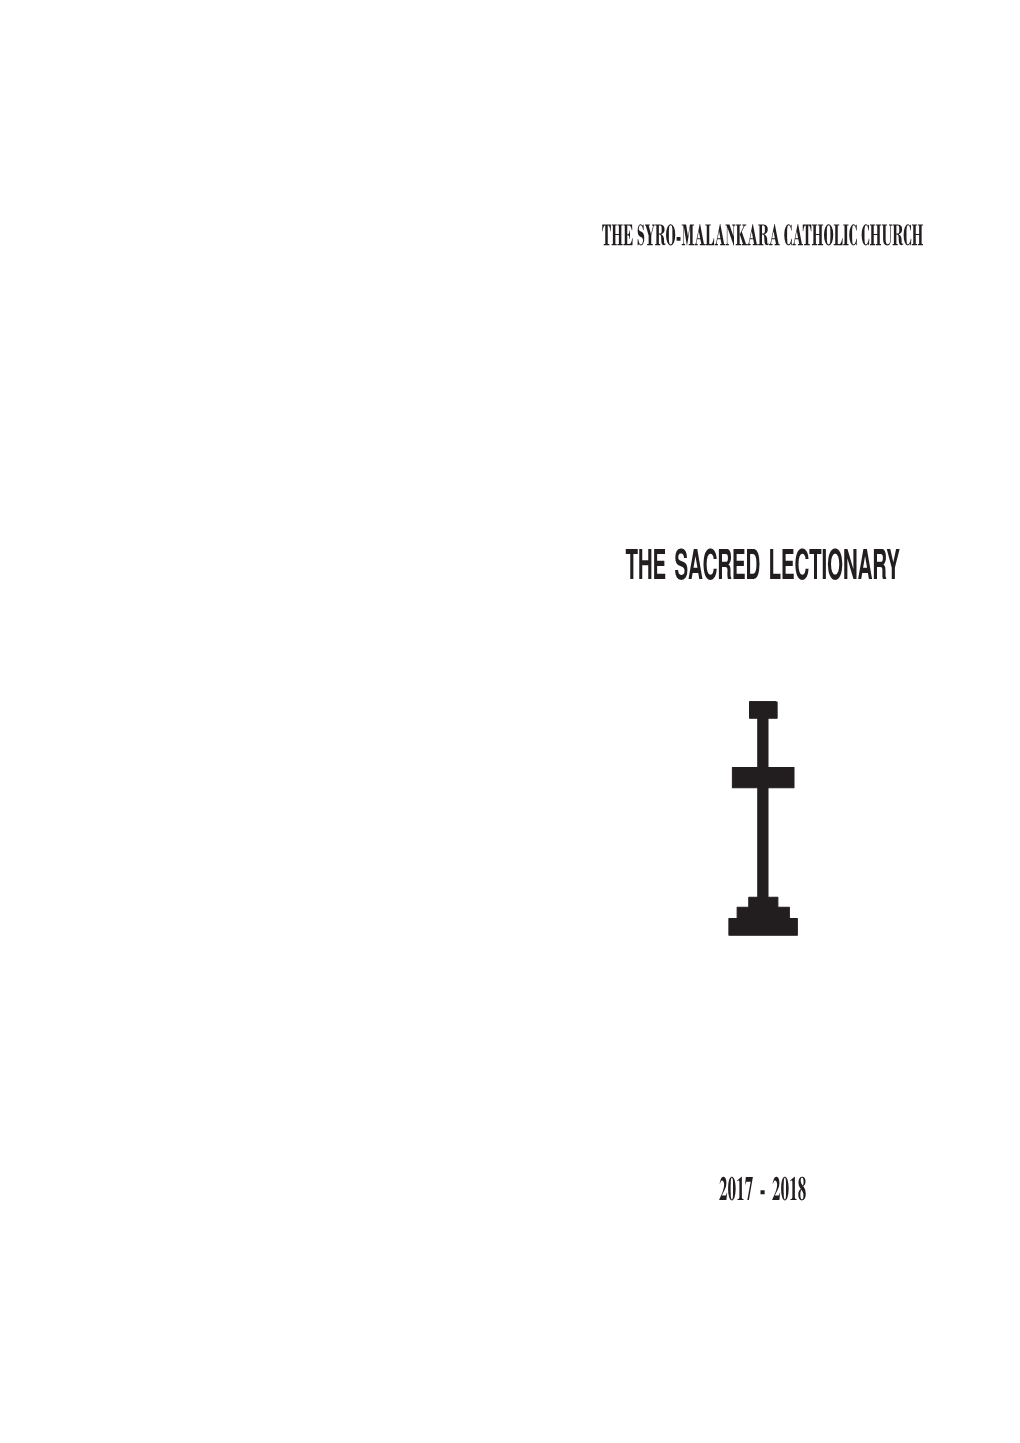 The Sacred Lectionary